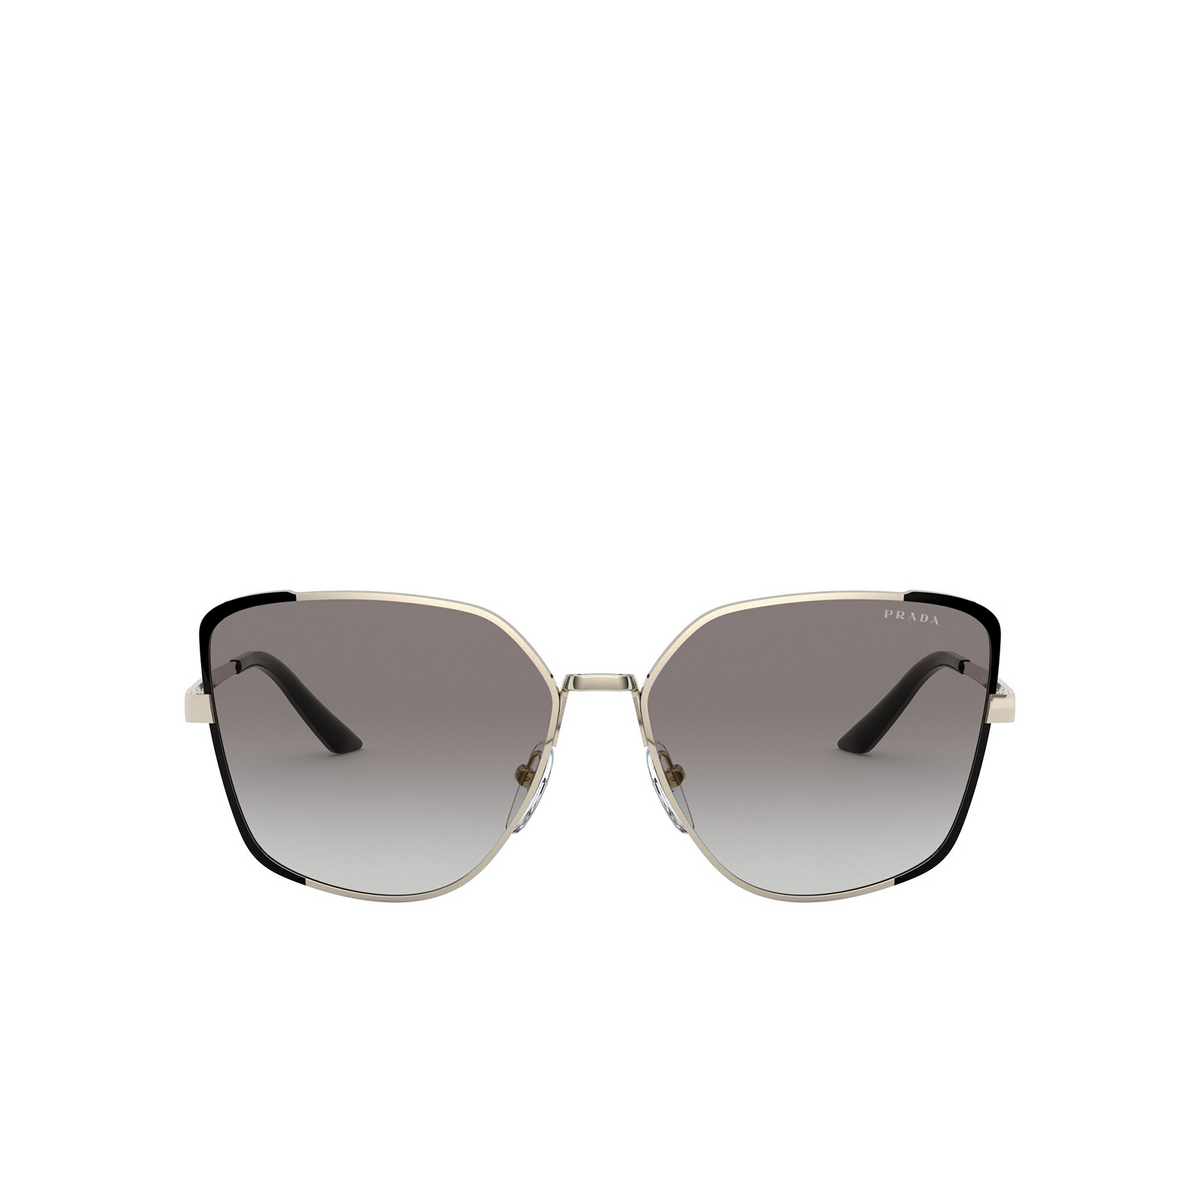 Prada® Butterfly Sunglasses: PR 60XS color Pale Gold / Black AAV0A7 - front view.